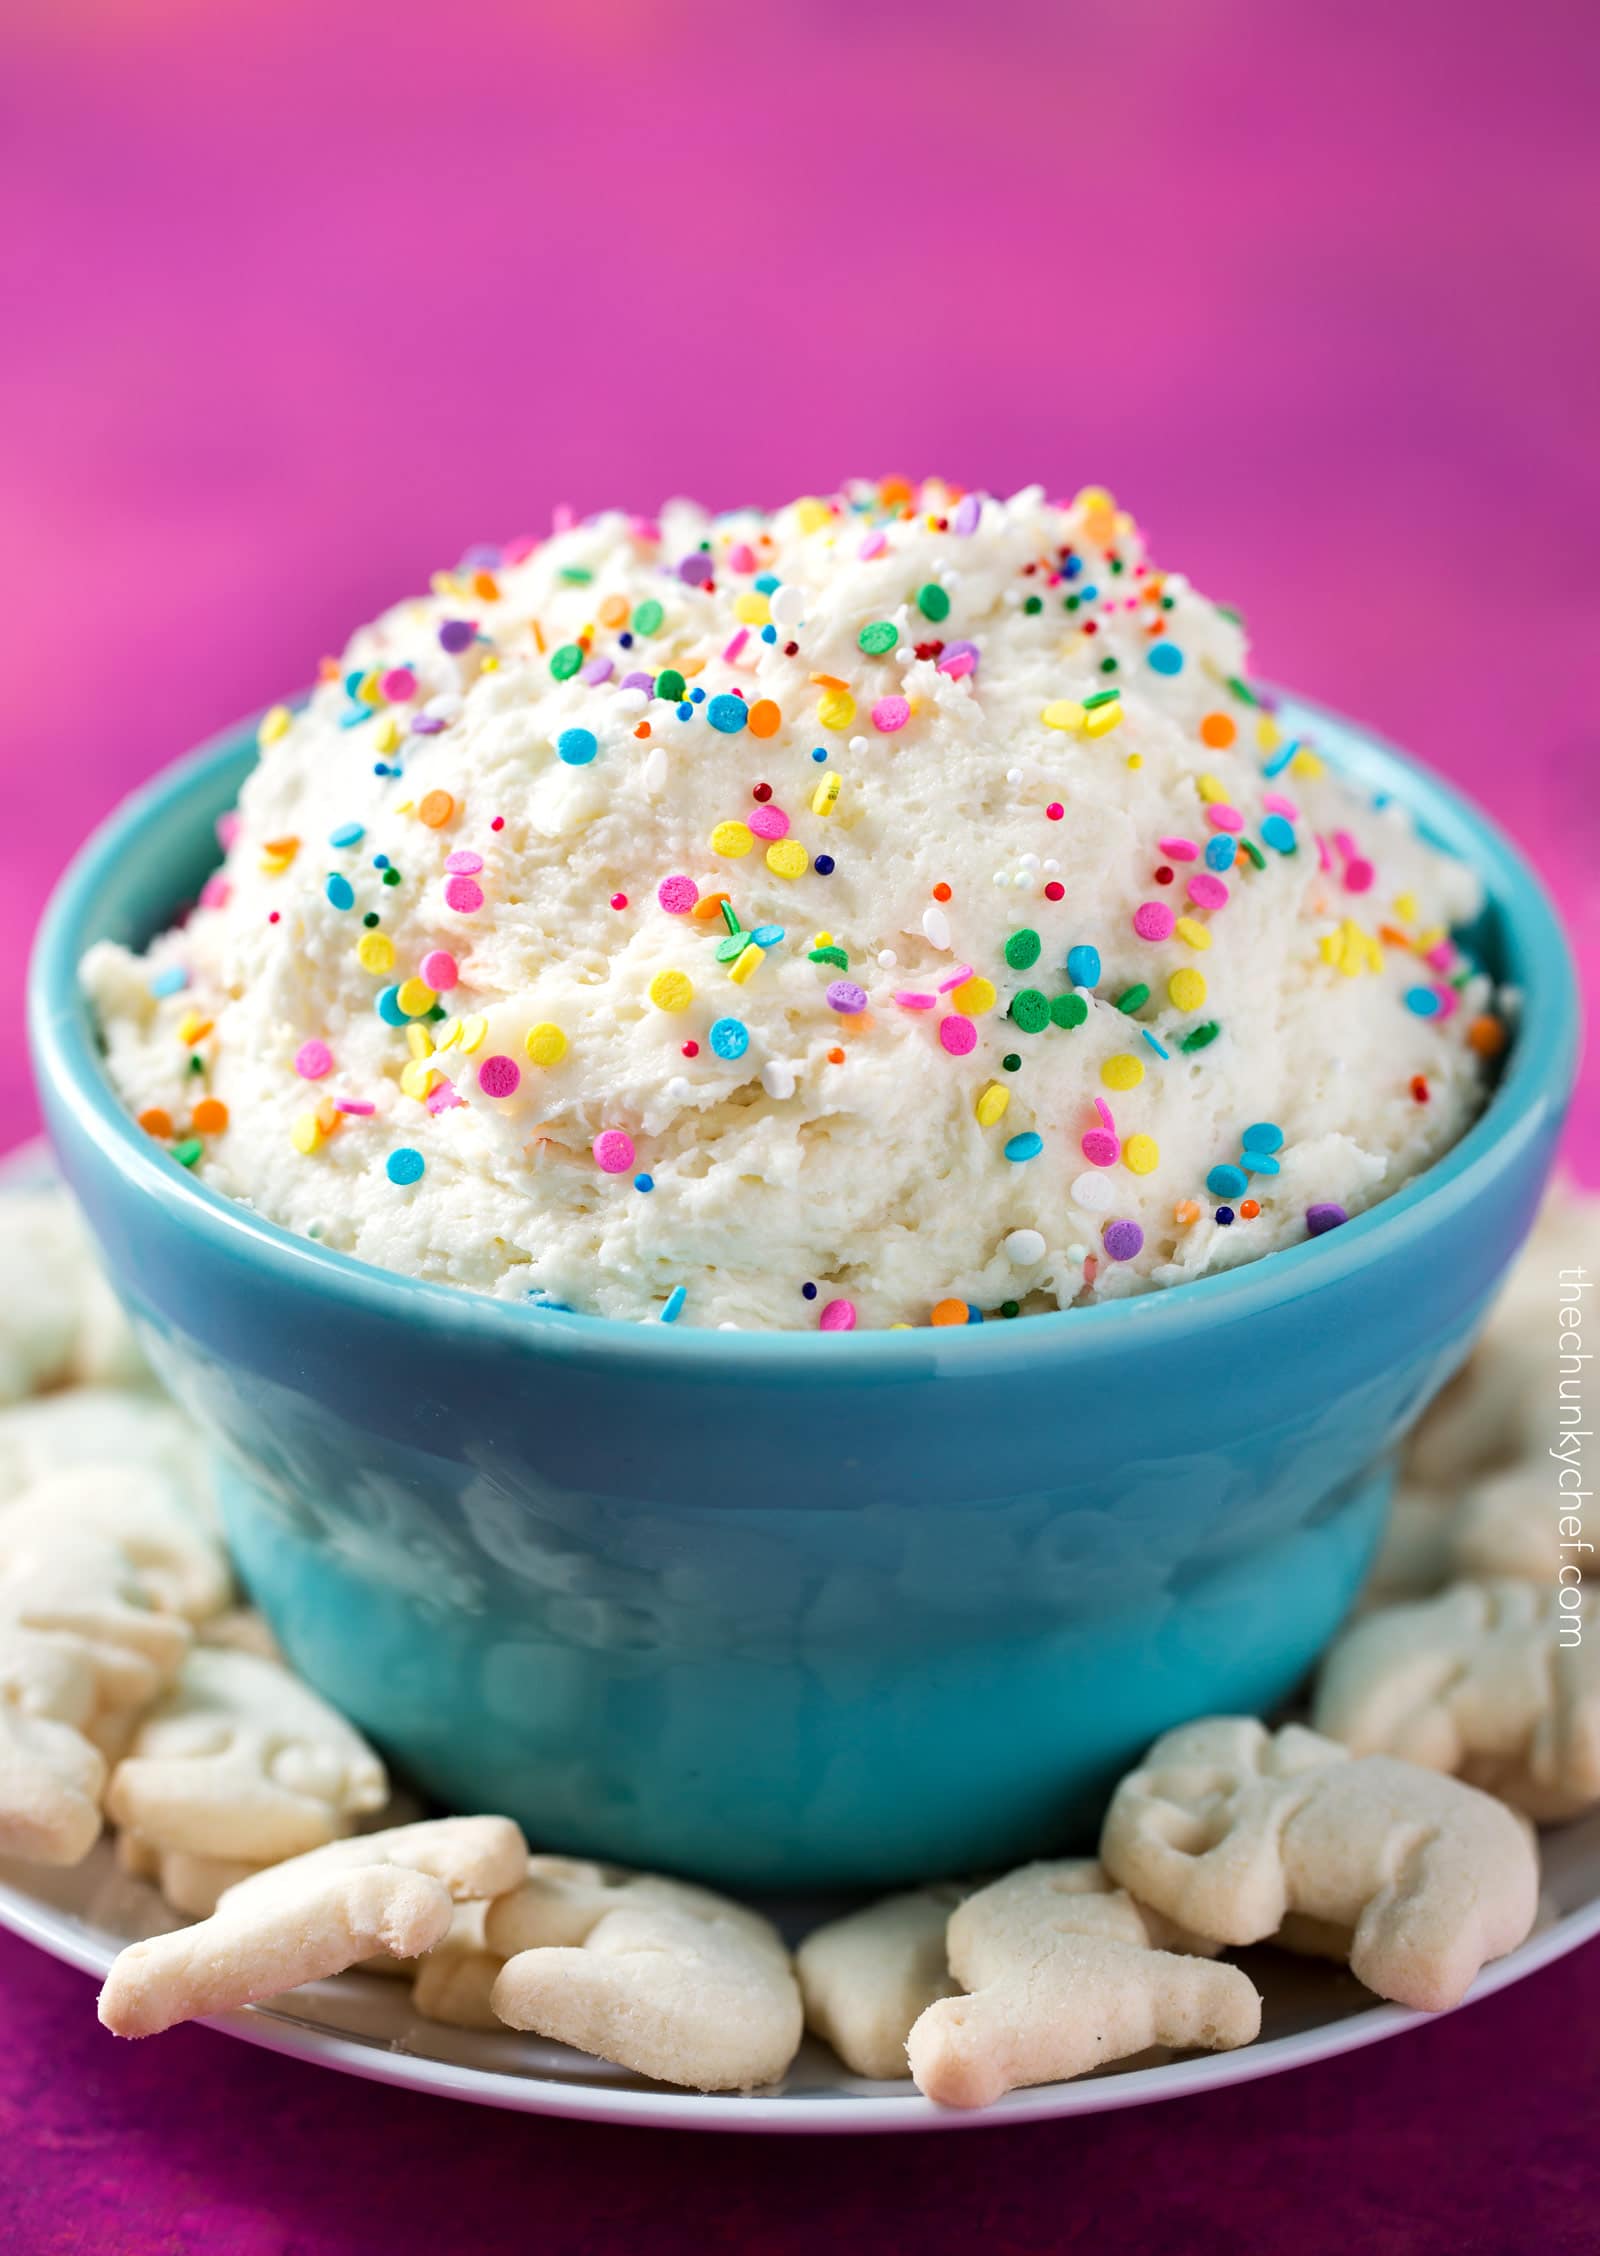 Four Ingredient Funfetti Cake Batter Dip - The Chunky Chef1600 x 2256